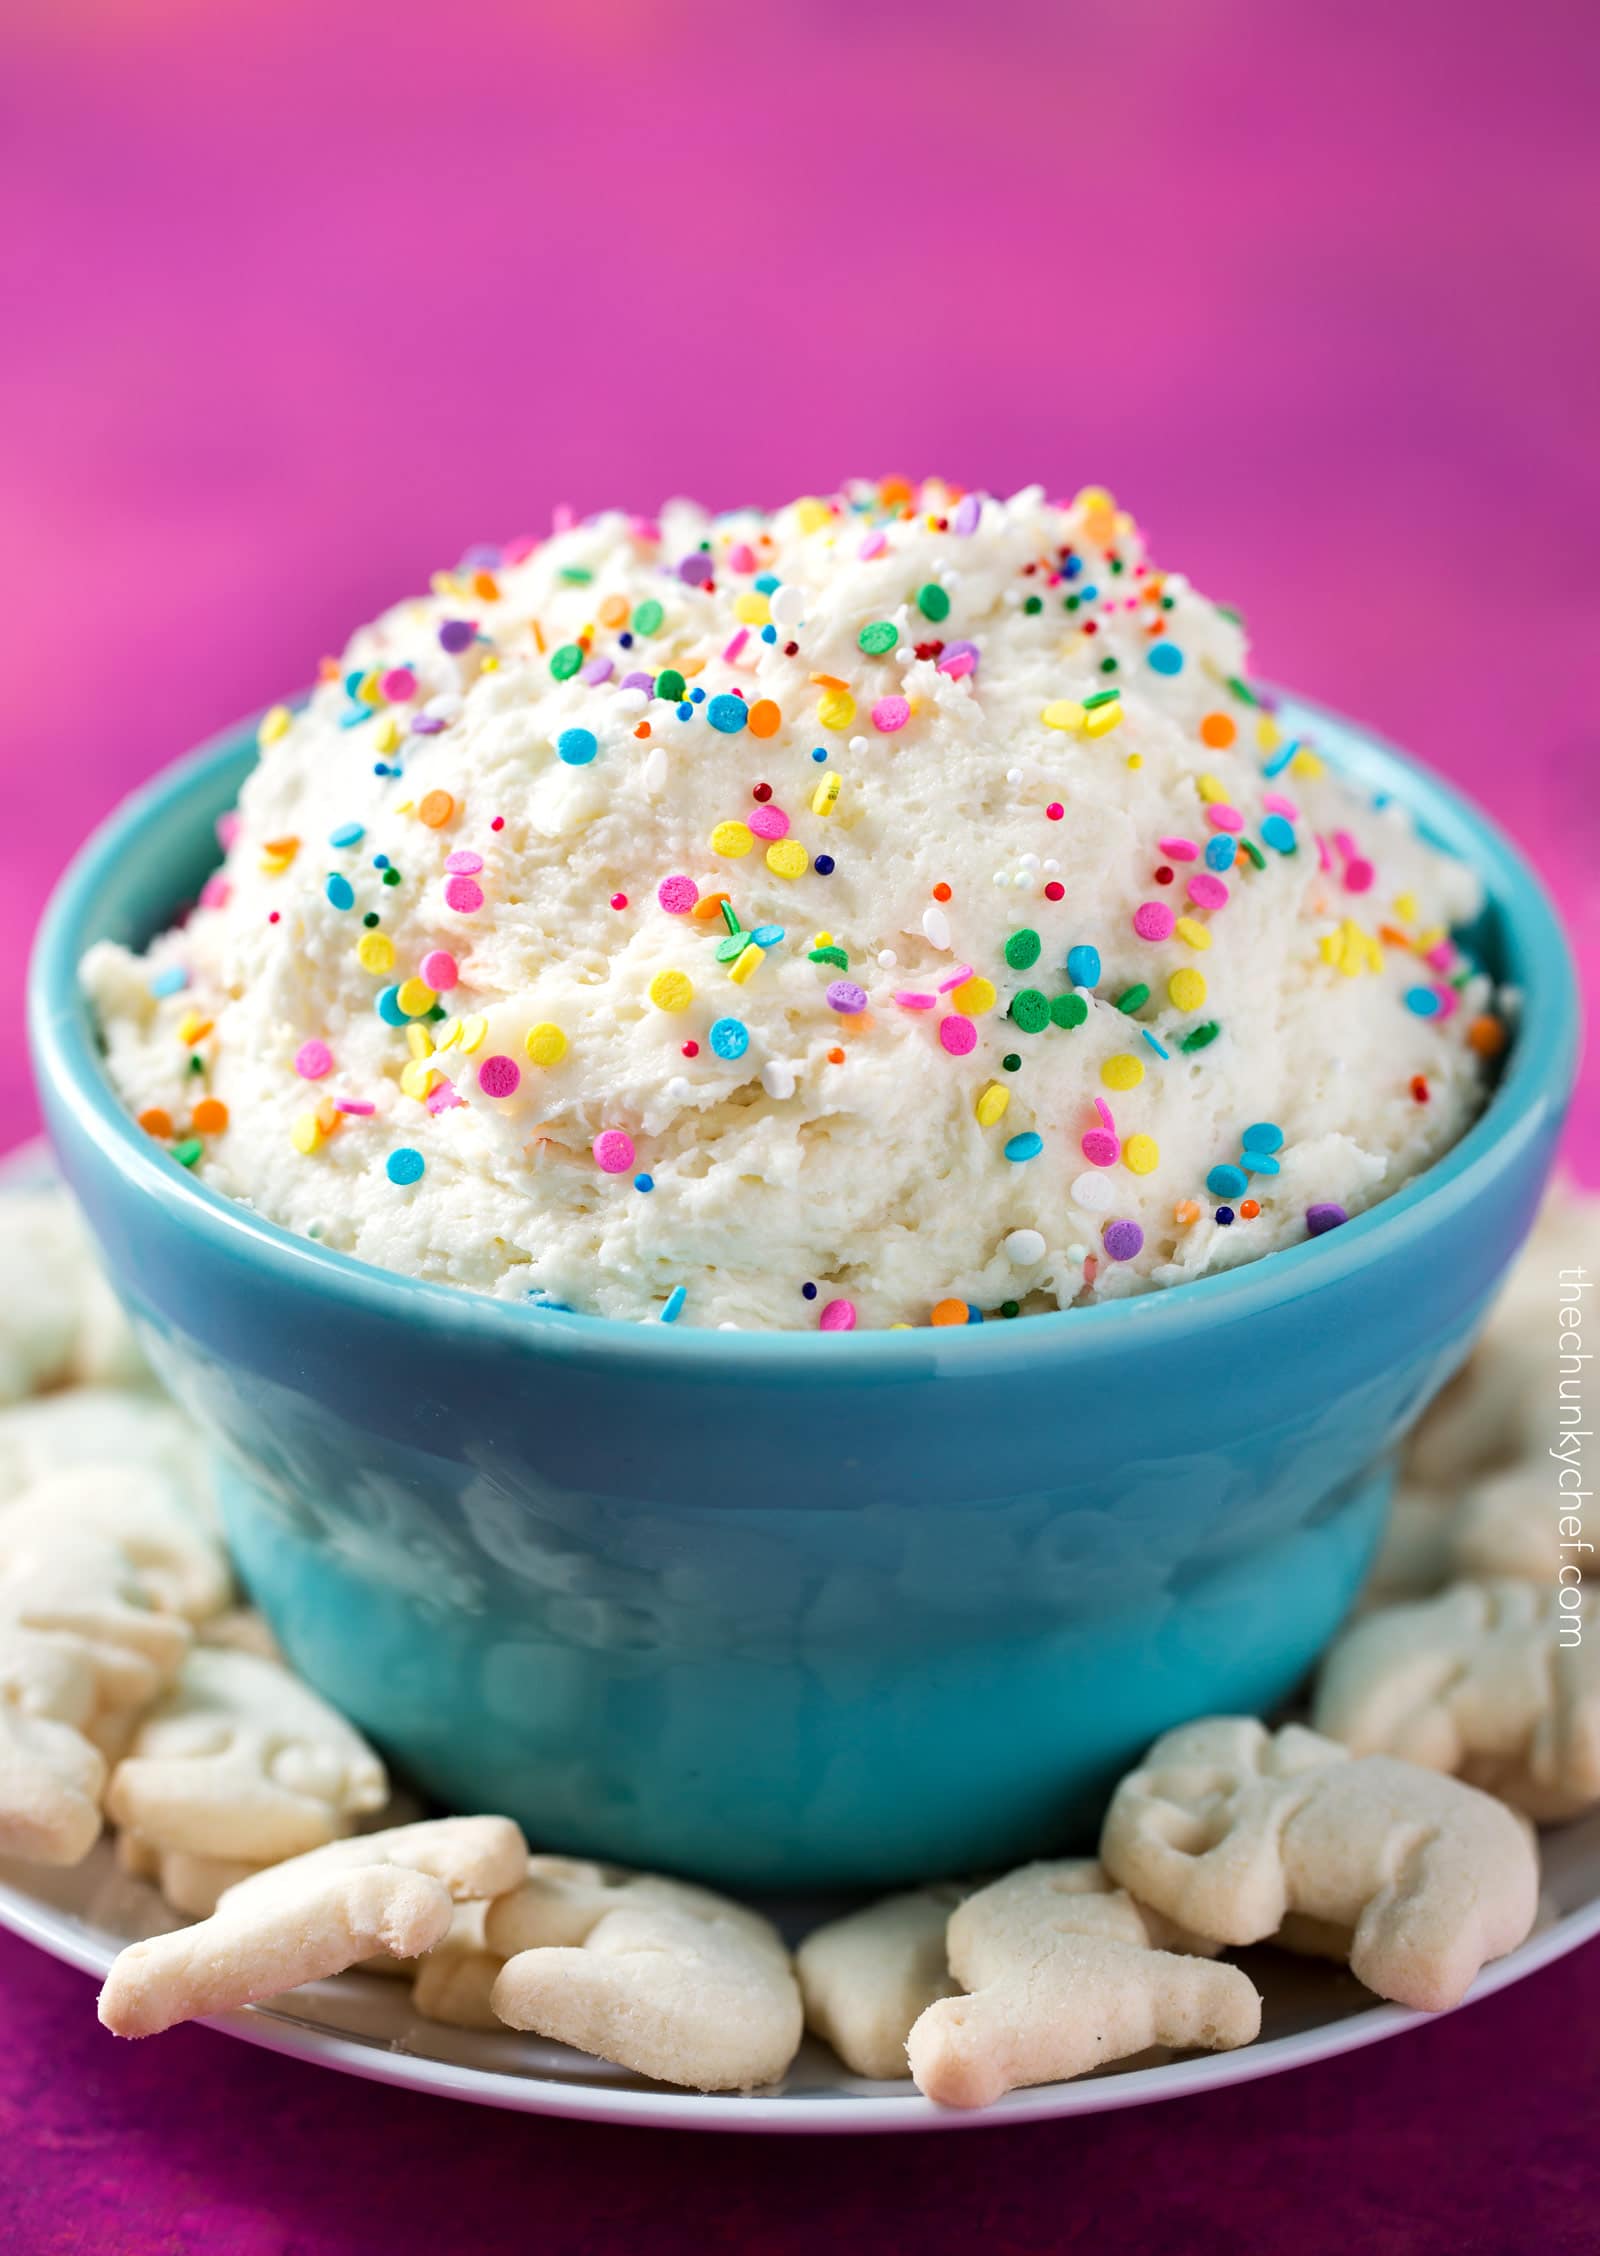 Four Ingredient Funfetti Cake Batter Dip - The Chunky Chef1600 x 2256